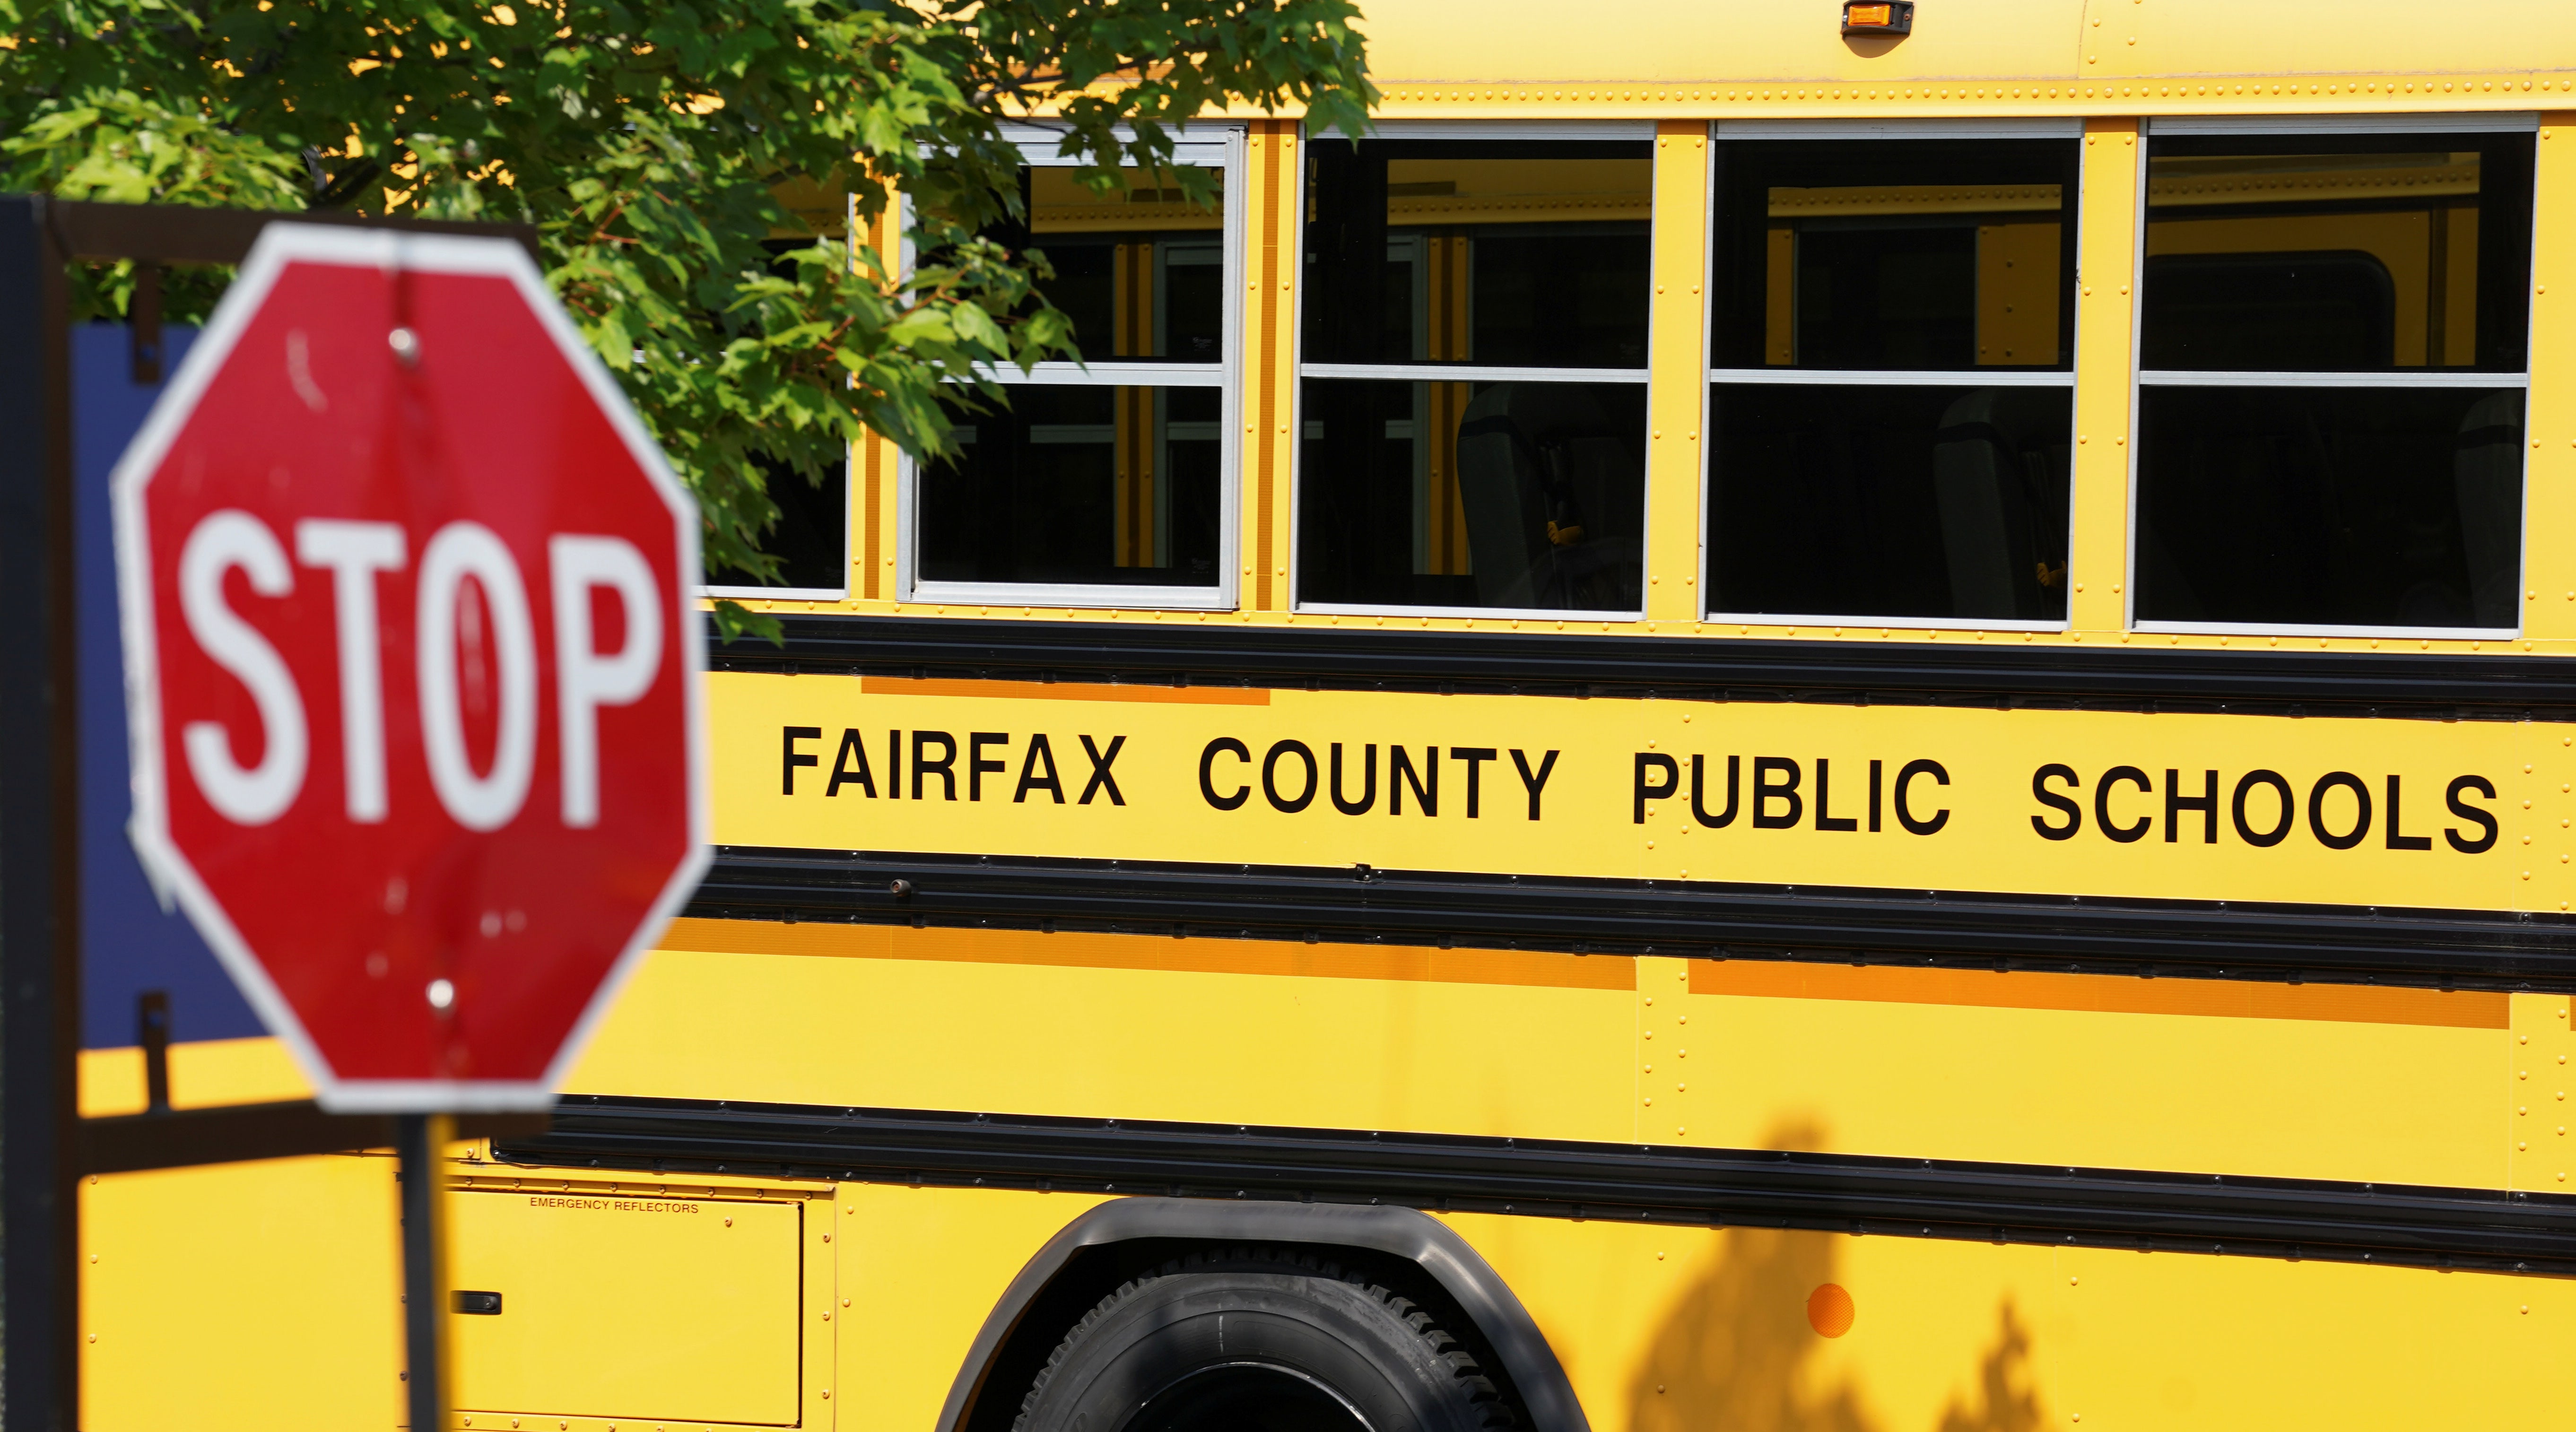 How To Win Friends And Influence People with fairfax county school budget